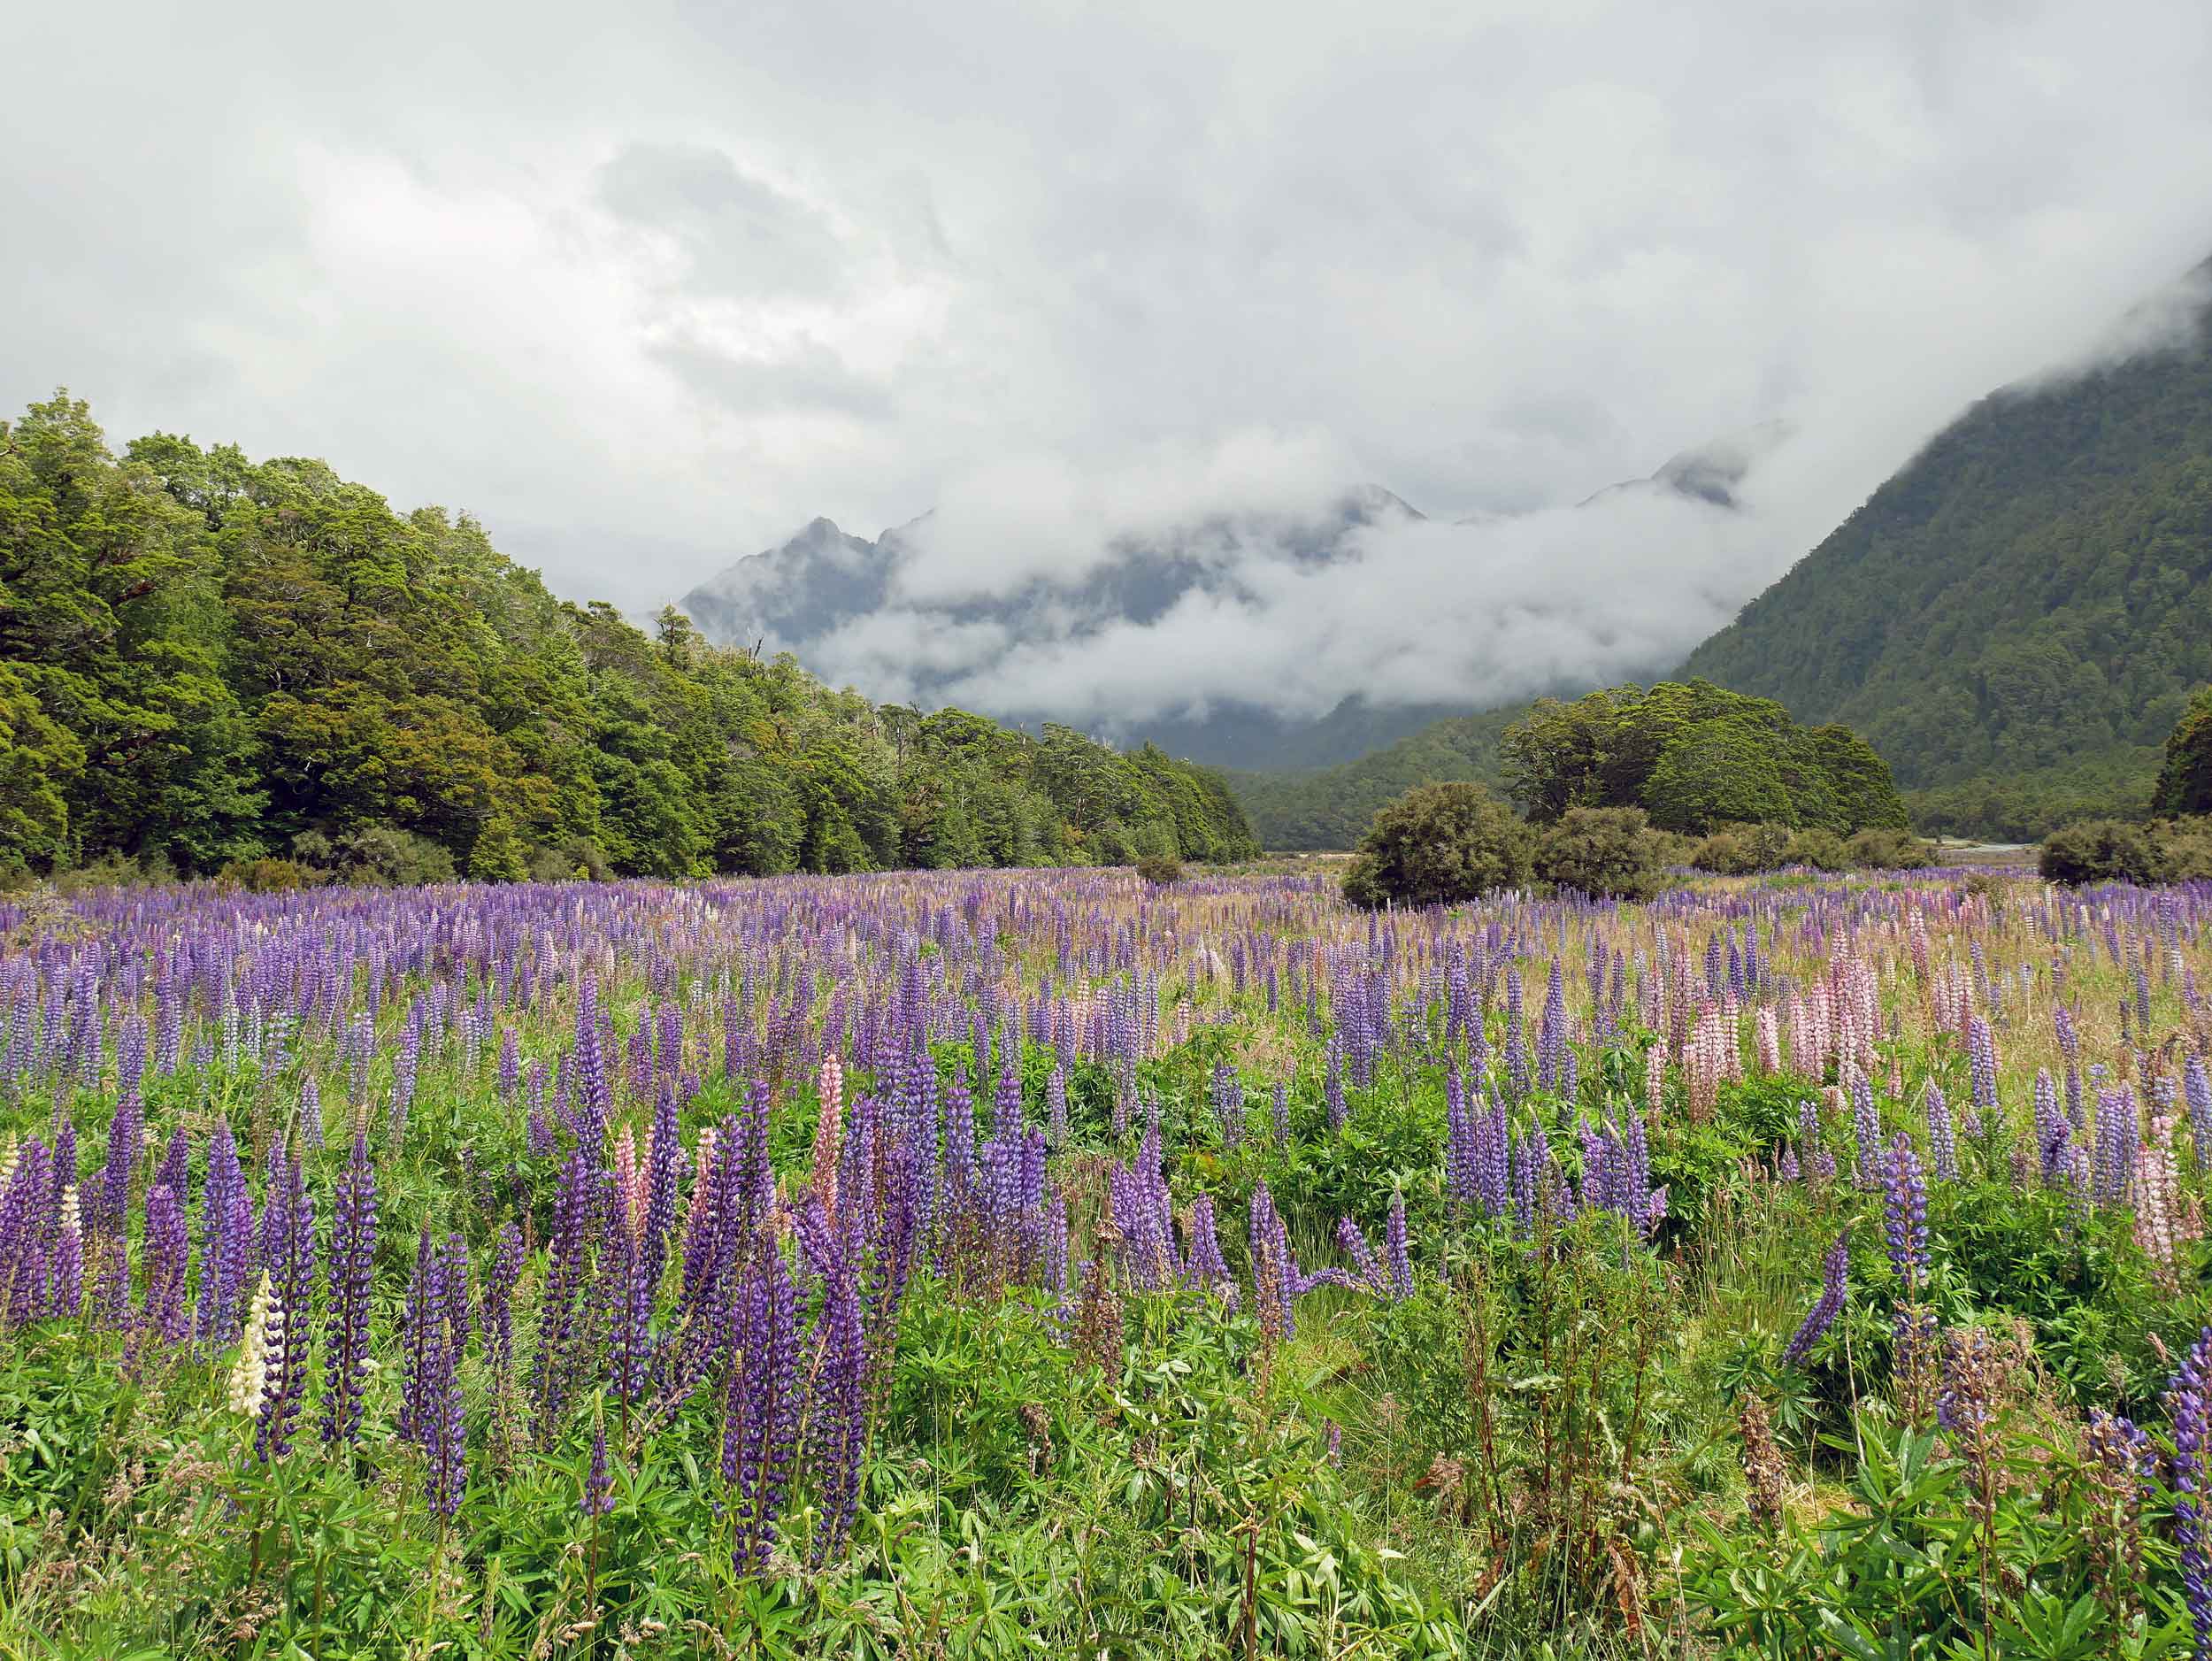  Delighted to find more fields of lupine in Fiordland National Park (Jan 9).&nbsp; 